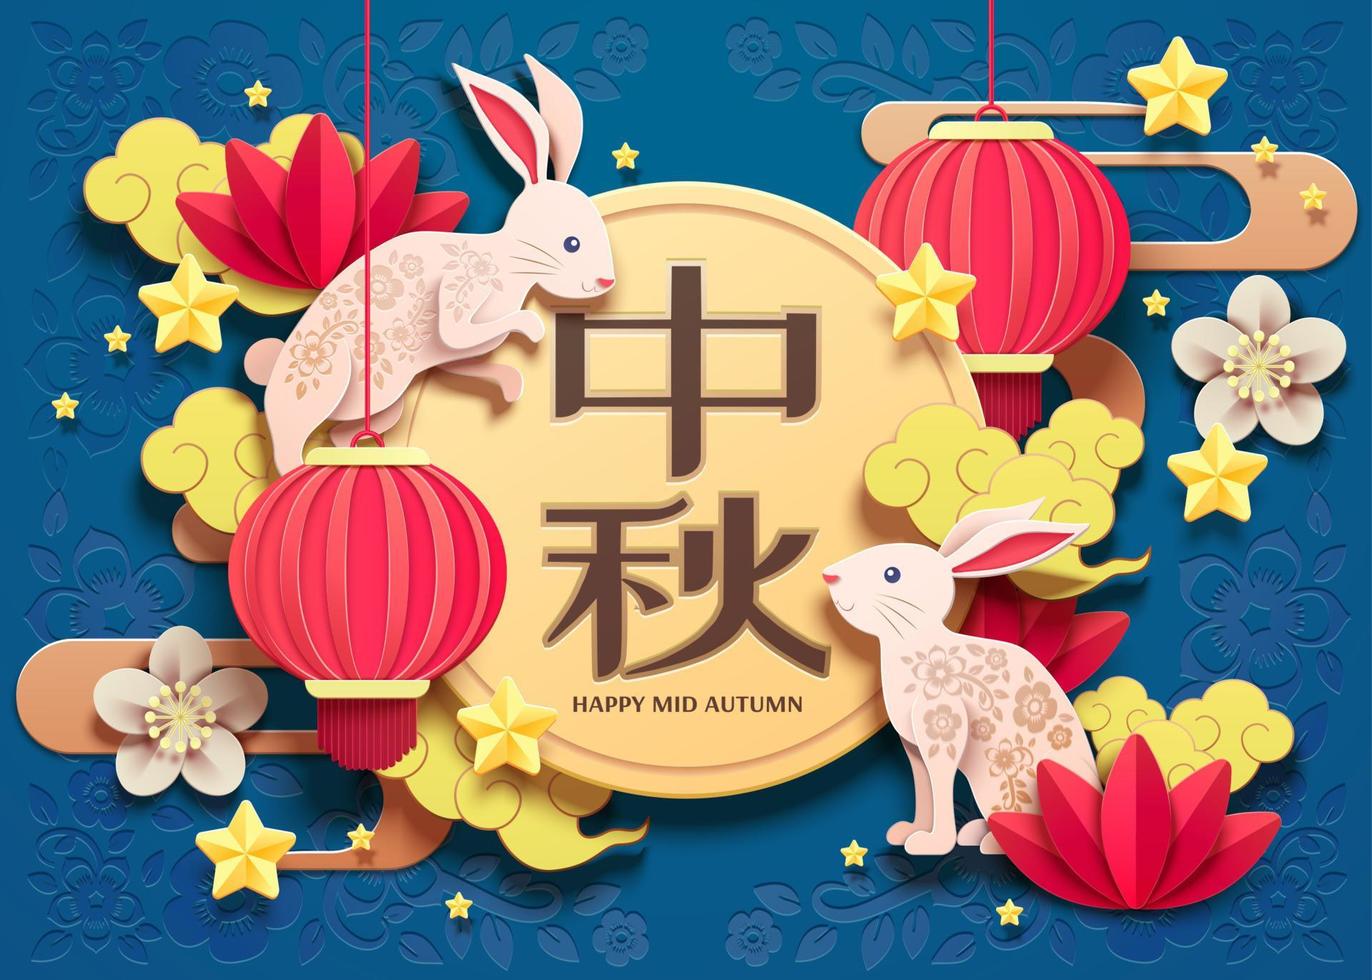 Happy mid autumn festival paper art design with white rabbit and lanterns elements on blue background, Holiday name written in Chinese words vector